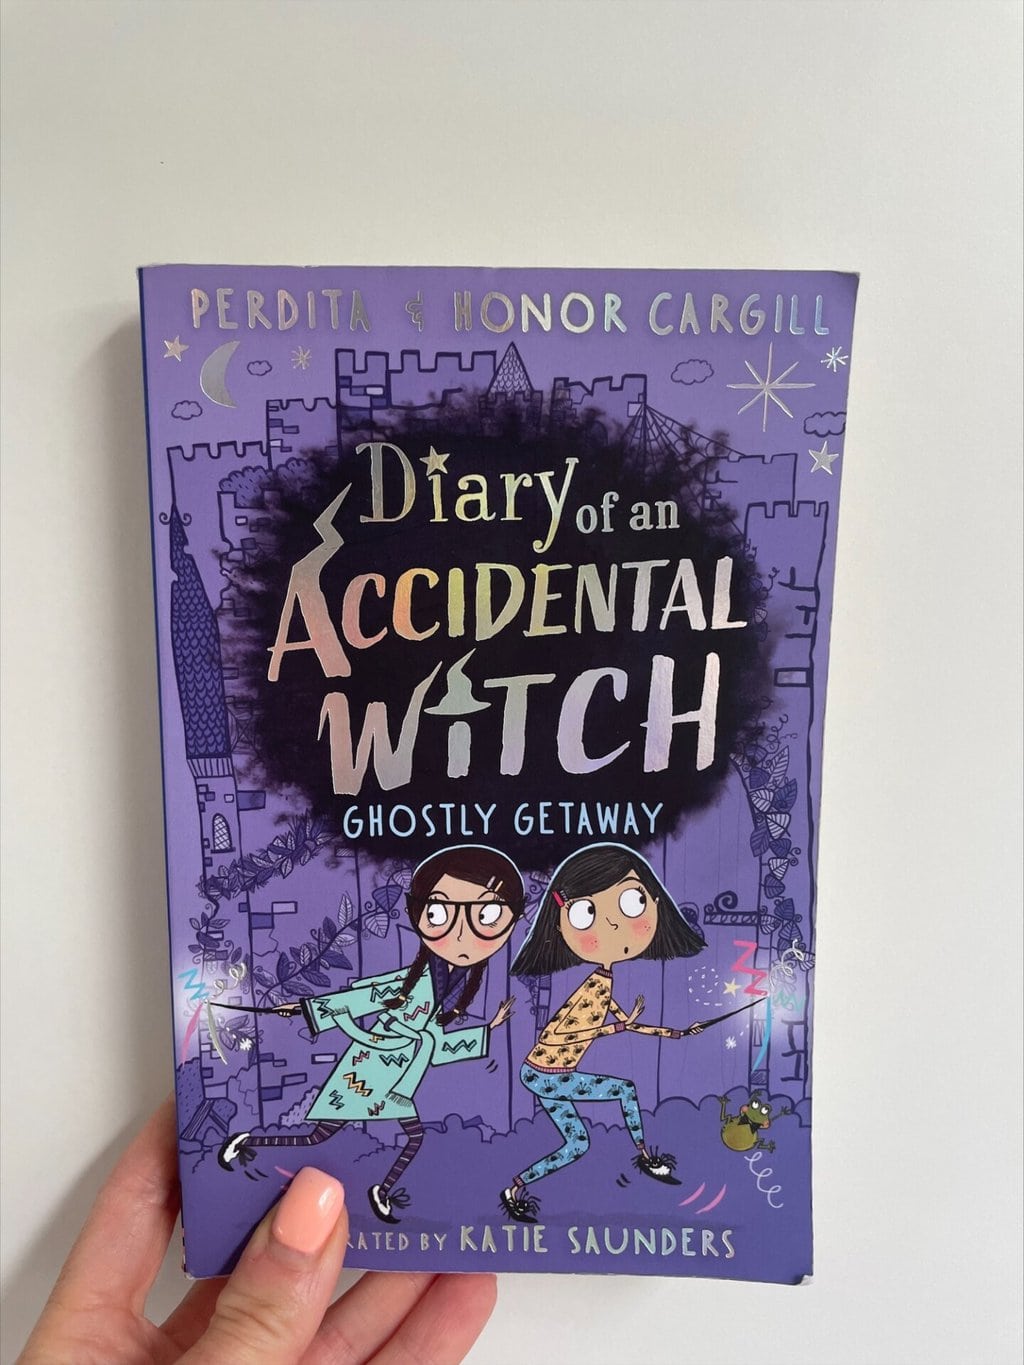 Diary of an Accidental Witch